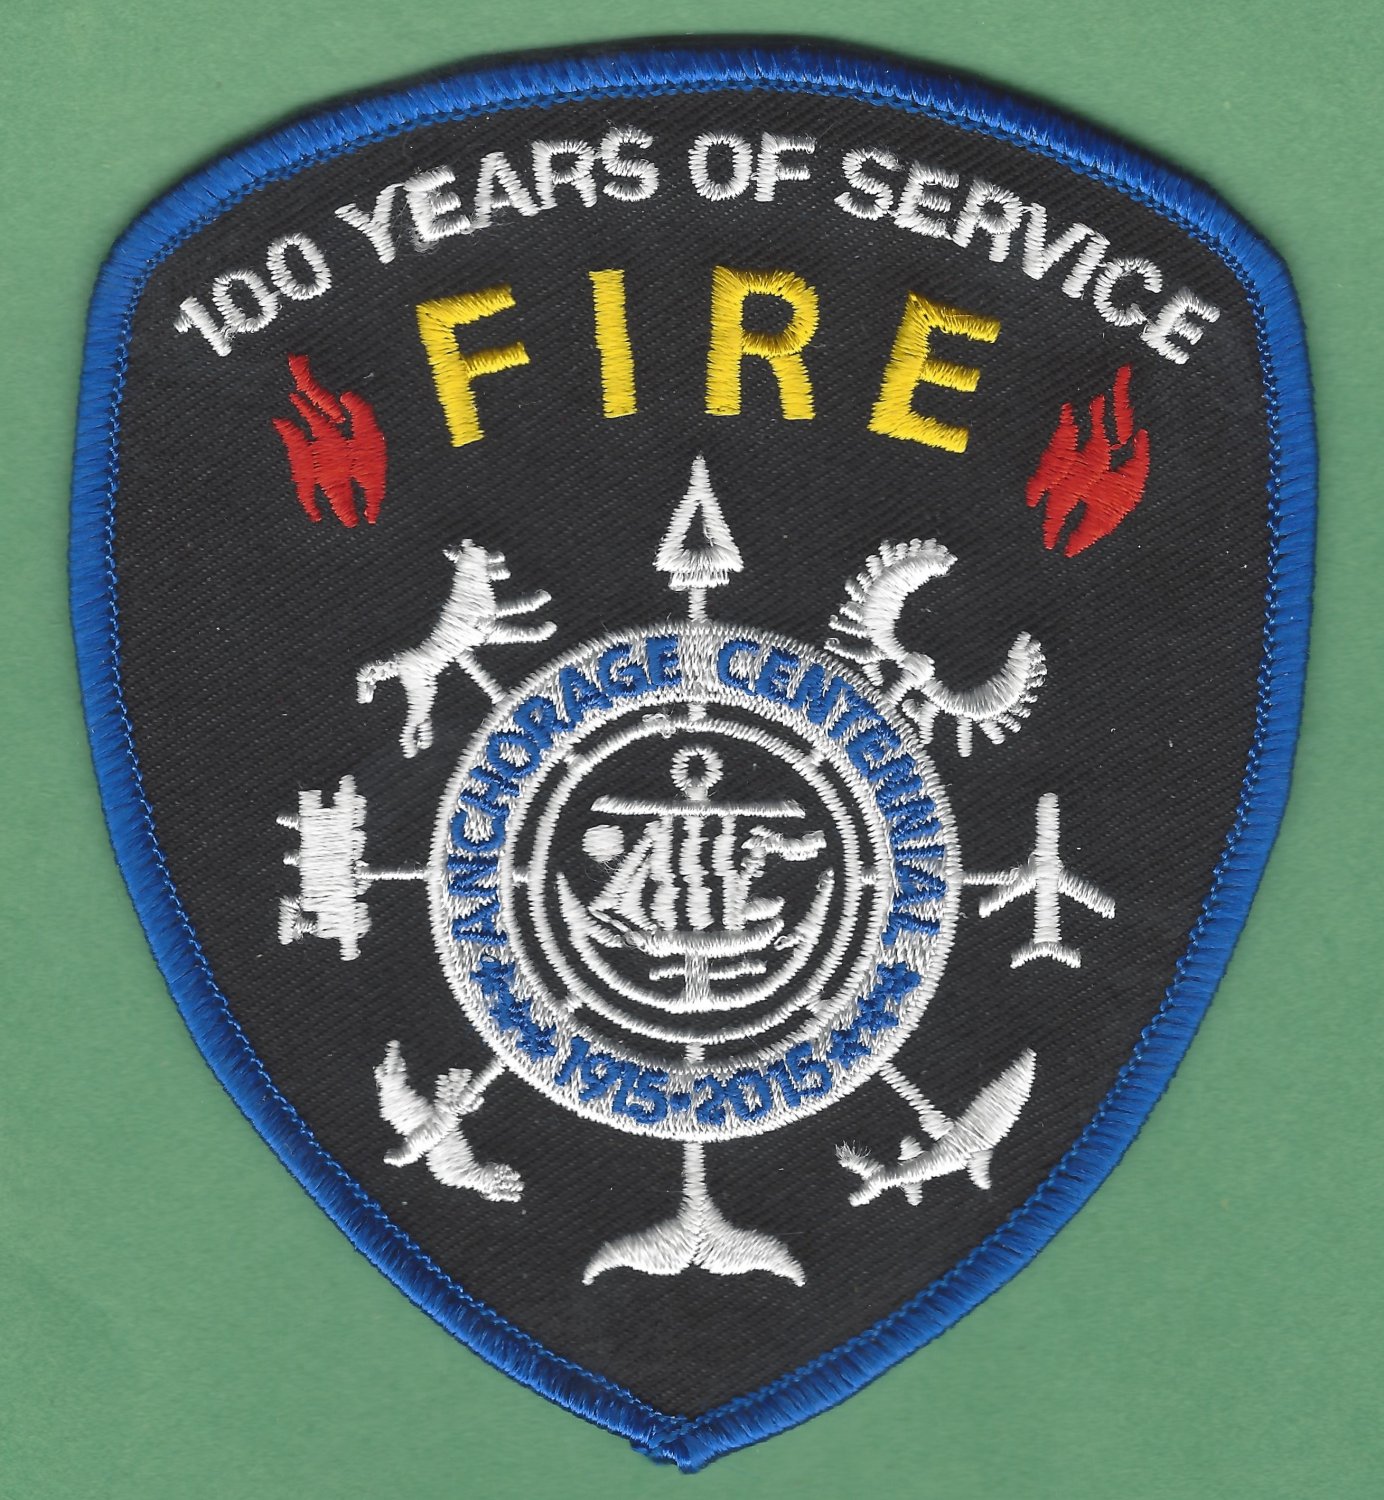 Anchorage Alaska Fire Rescue Patch 100 Years of Service